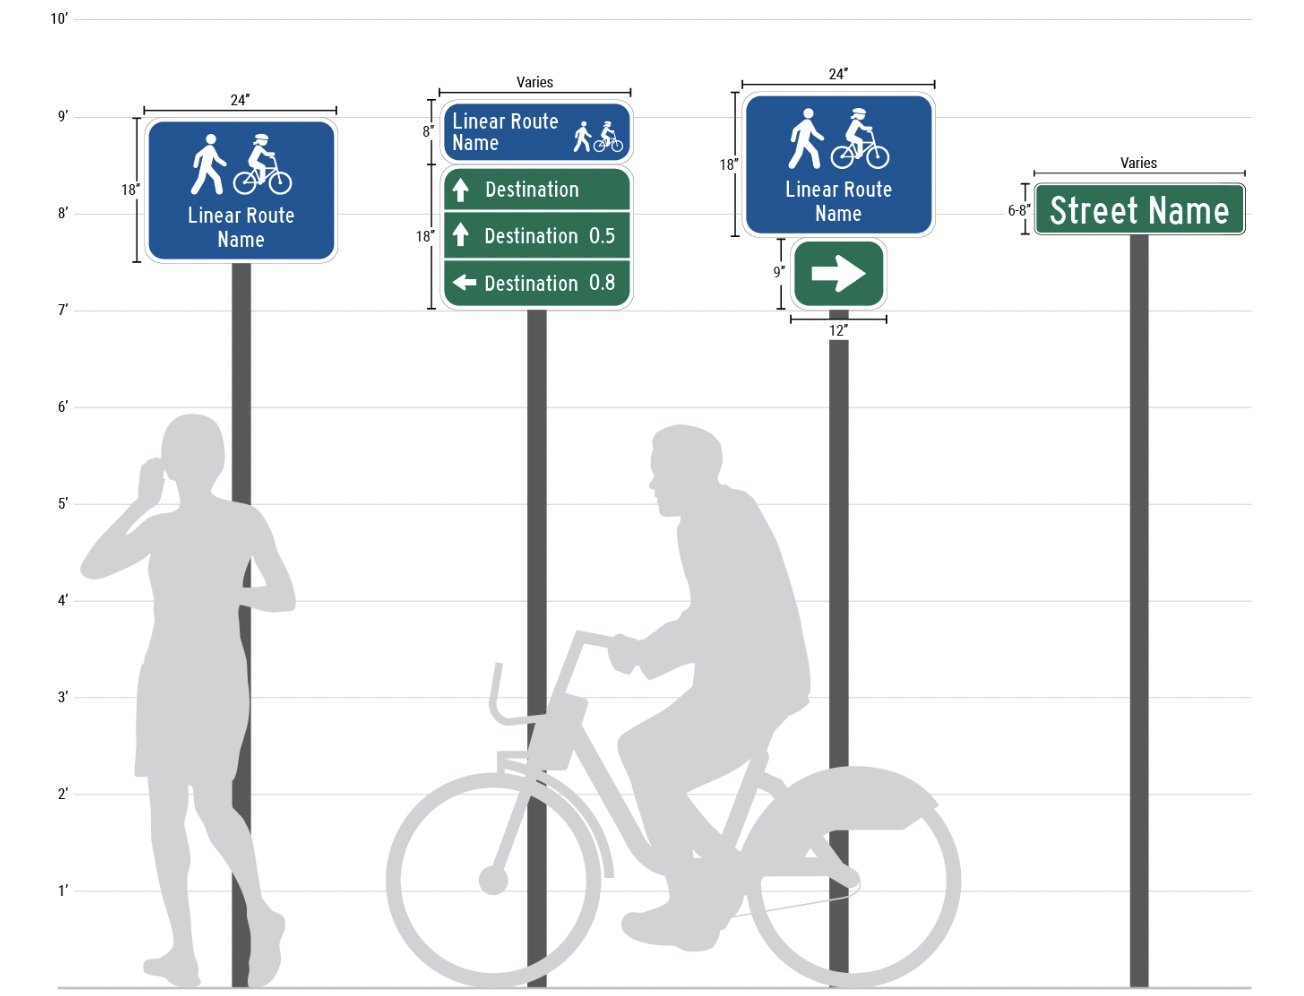 A diagram showing recommended installation heights and four varieties of signage from MassDOT's bike route signage design guide. Gray outlines of a person walking and a person riding a bike are shown for scale against a light grid of horizontal lines that indicate height in 1-foot increments. The four example signs all have 7 feet of clearance underneath them. The leftmost sample sign, which is indicated as 18 inches tall by 24 inches wide, shows icons of a bike rider and pedestrian in white on a blue background above the words "Linear Route Name." To the right, the next sample sign shows two signs mounted on a single pole: the top sign is a smaller 8-inch-tall blue-background "Linear Route Name" indicator sign; below it, a green sign split vertically into three sections has three white arrows pointing in various directions next to three copies of the word "Destination." To that sign's right, a third sample sign shows the same 18-inch-by-24-inch blue "Linear Route Name" sign over a smaller sign with a single, bold white arrow on a green background. The fourth and rightmost sign, specifed as 6 to 8 inches tall, says "Street Name" in white on a green background.